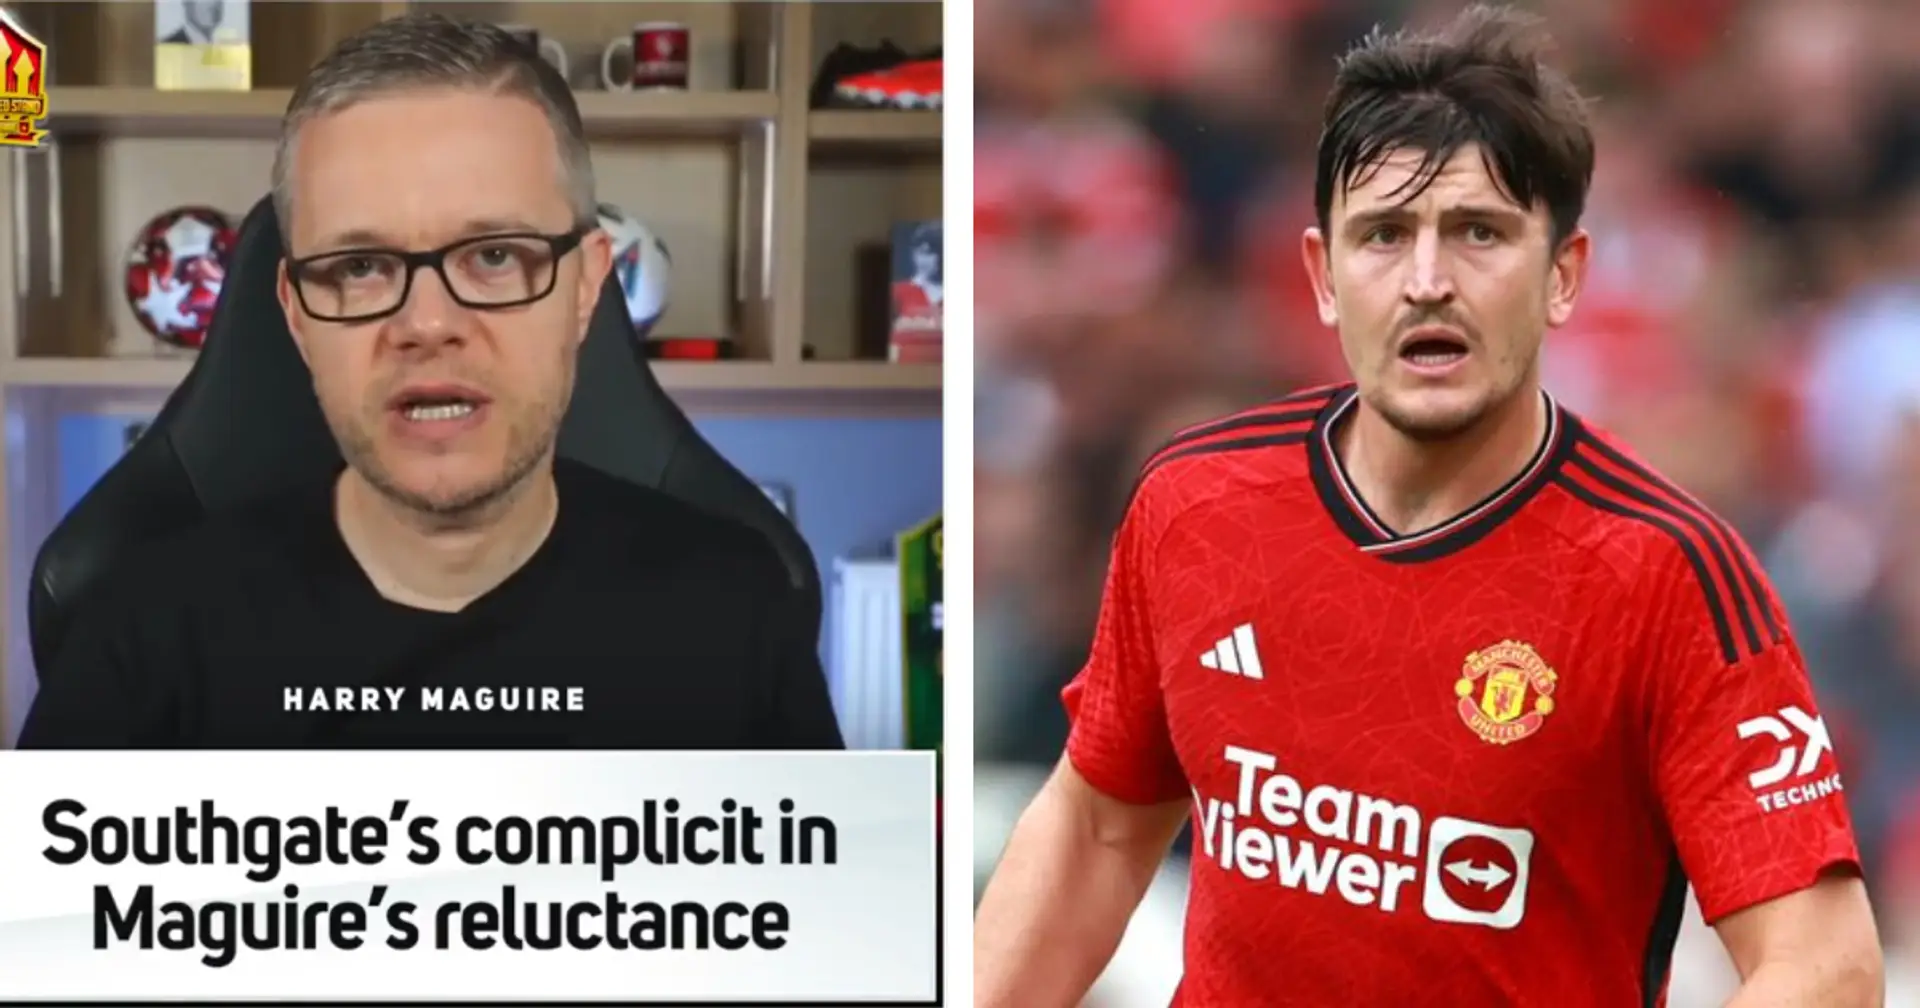 'Southgate has indirectly screwed Man United': Mark Goldbridge reacts to Harry Maguire's England call-up